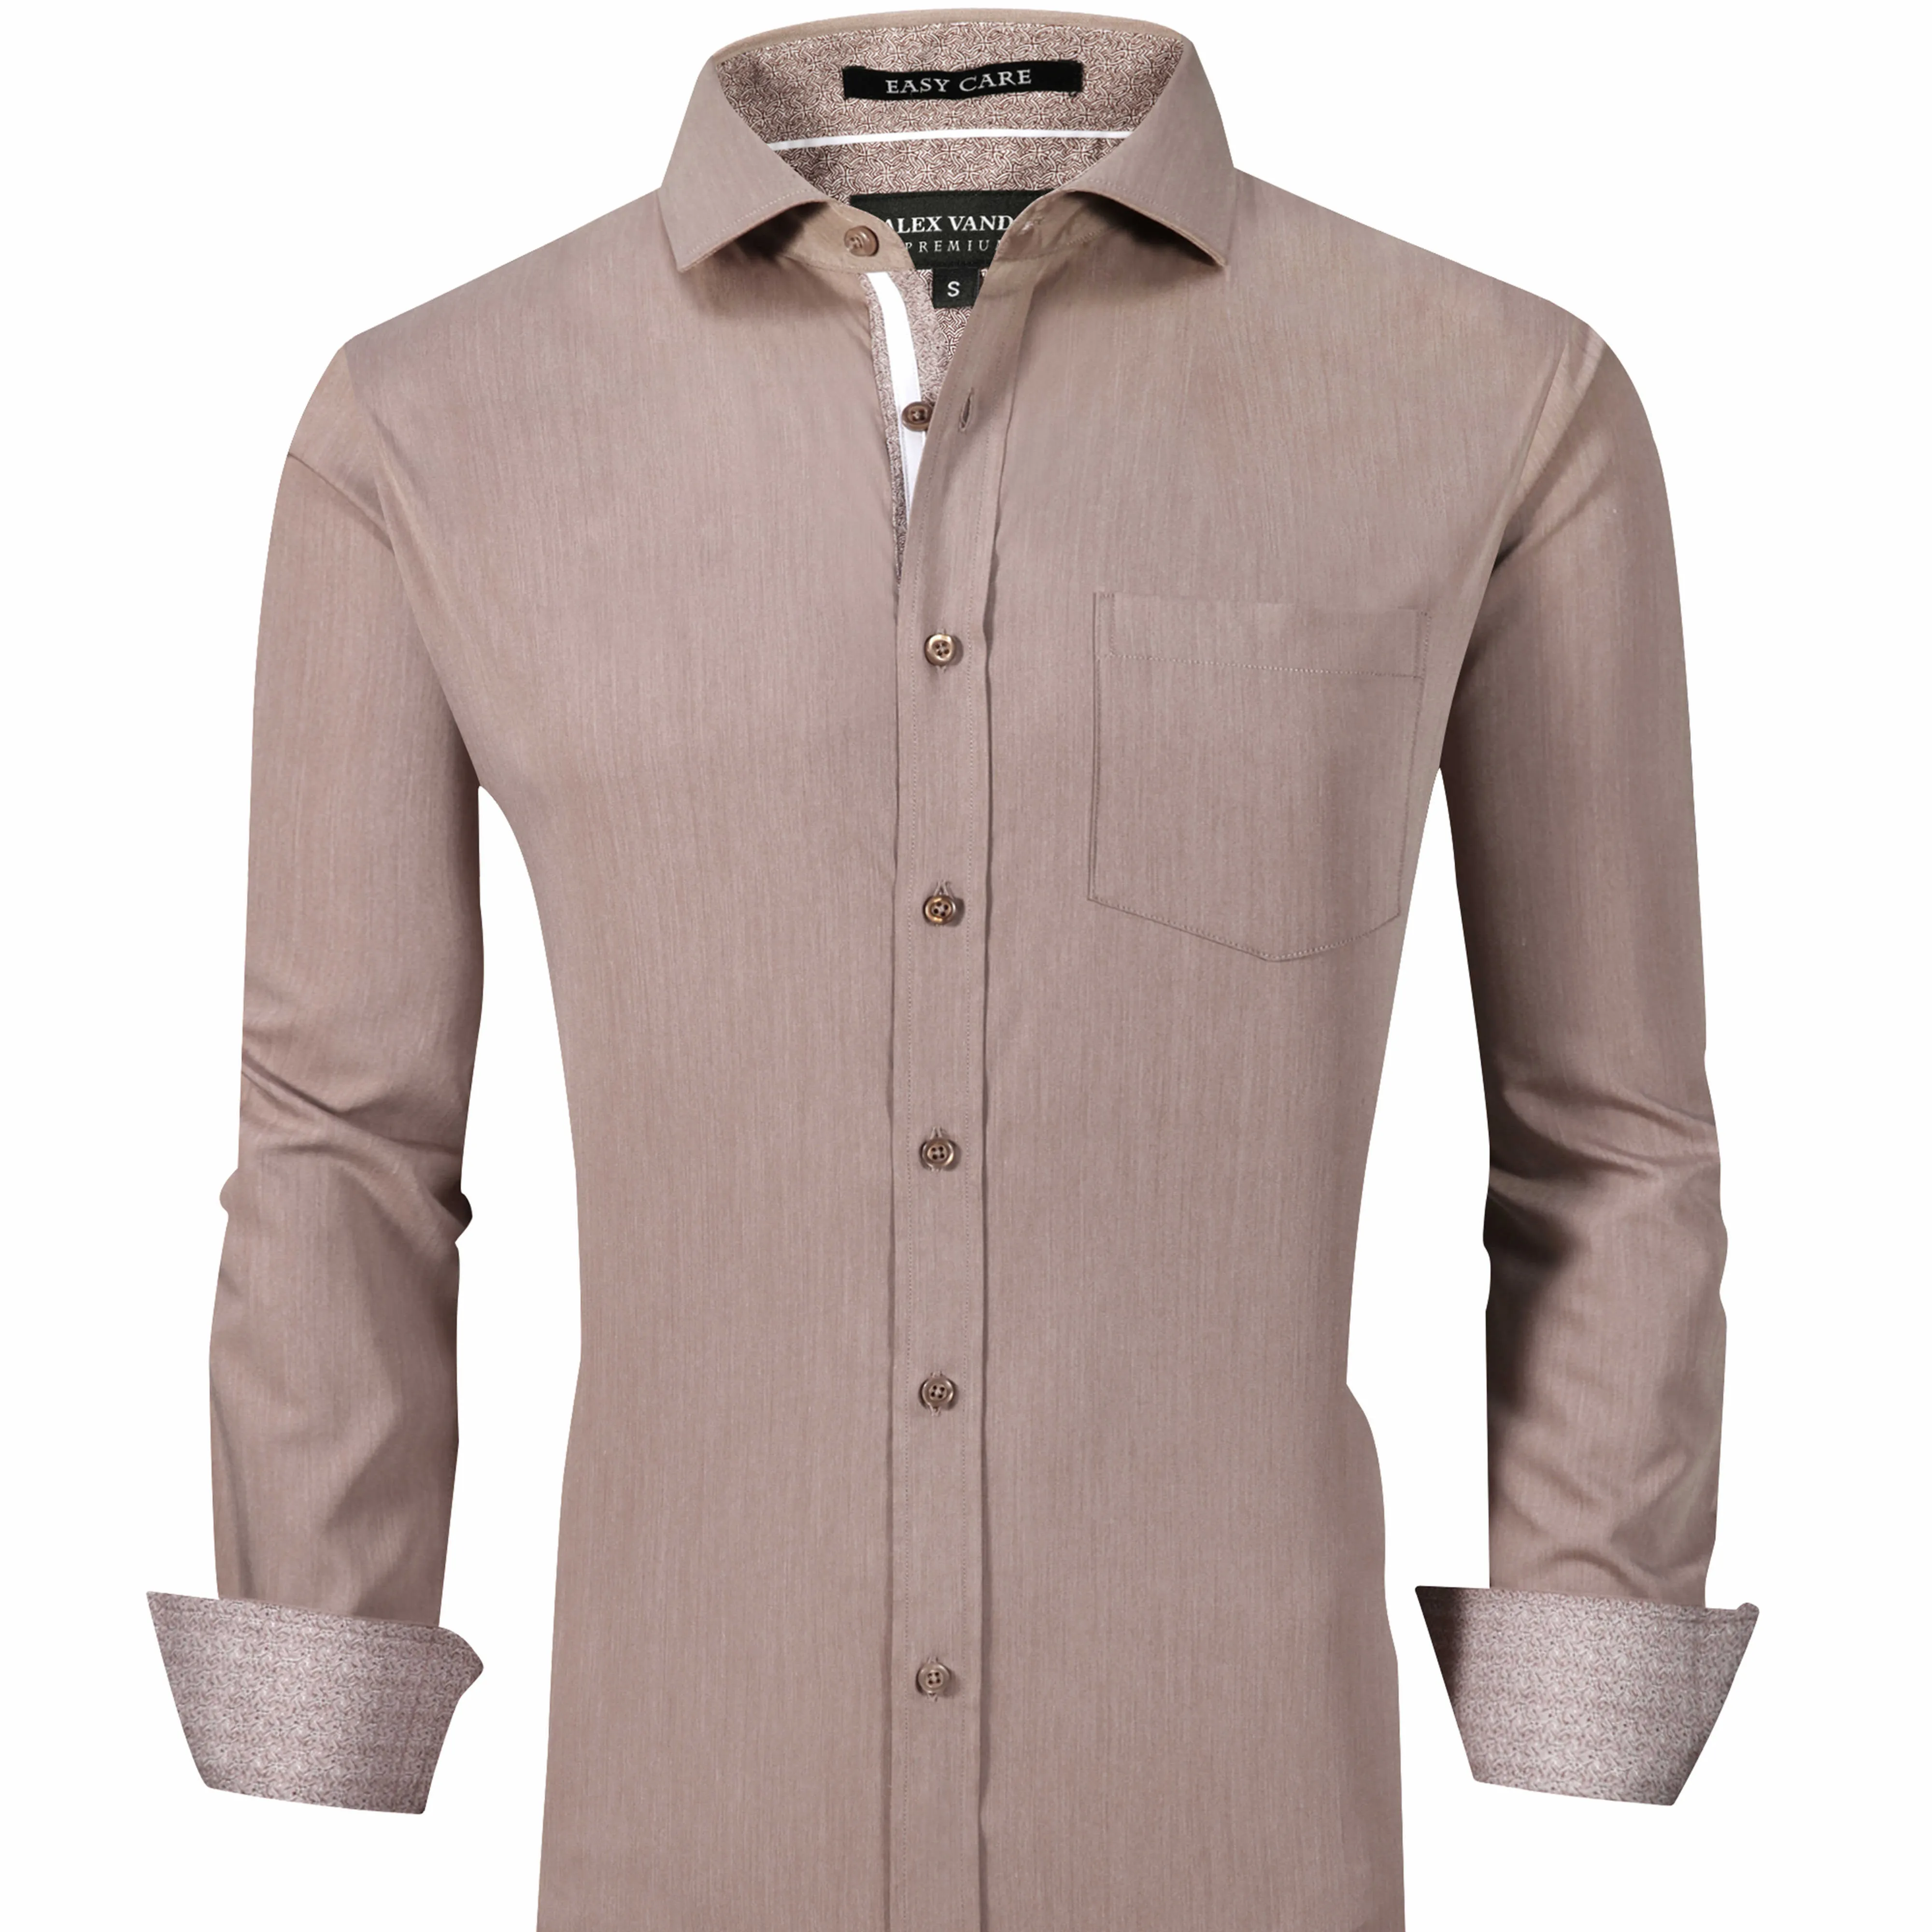 OEM/ODM Camisas Hombre Manga Larga Solid Color Business Casual Hot Male Woven Shirt Camisas Hombre